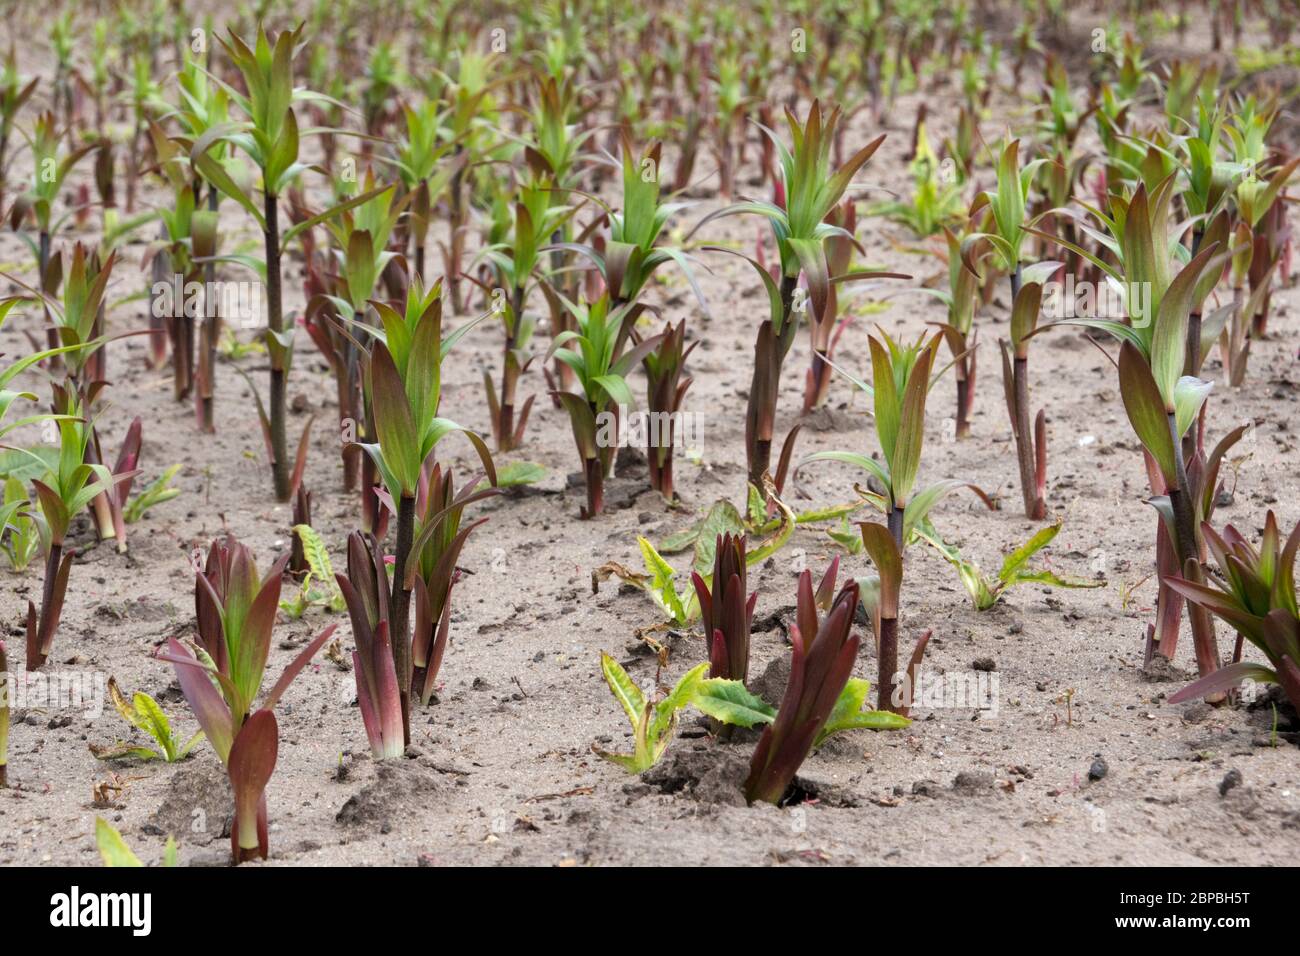 Drought: cultivation of Lilies in agriculture on a sandy, dry field Stock Photo